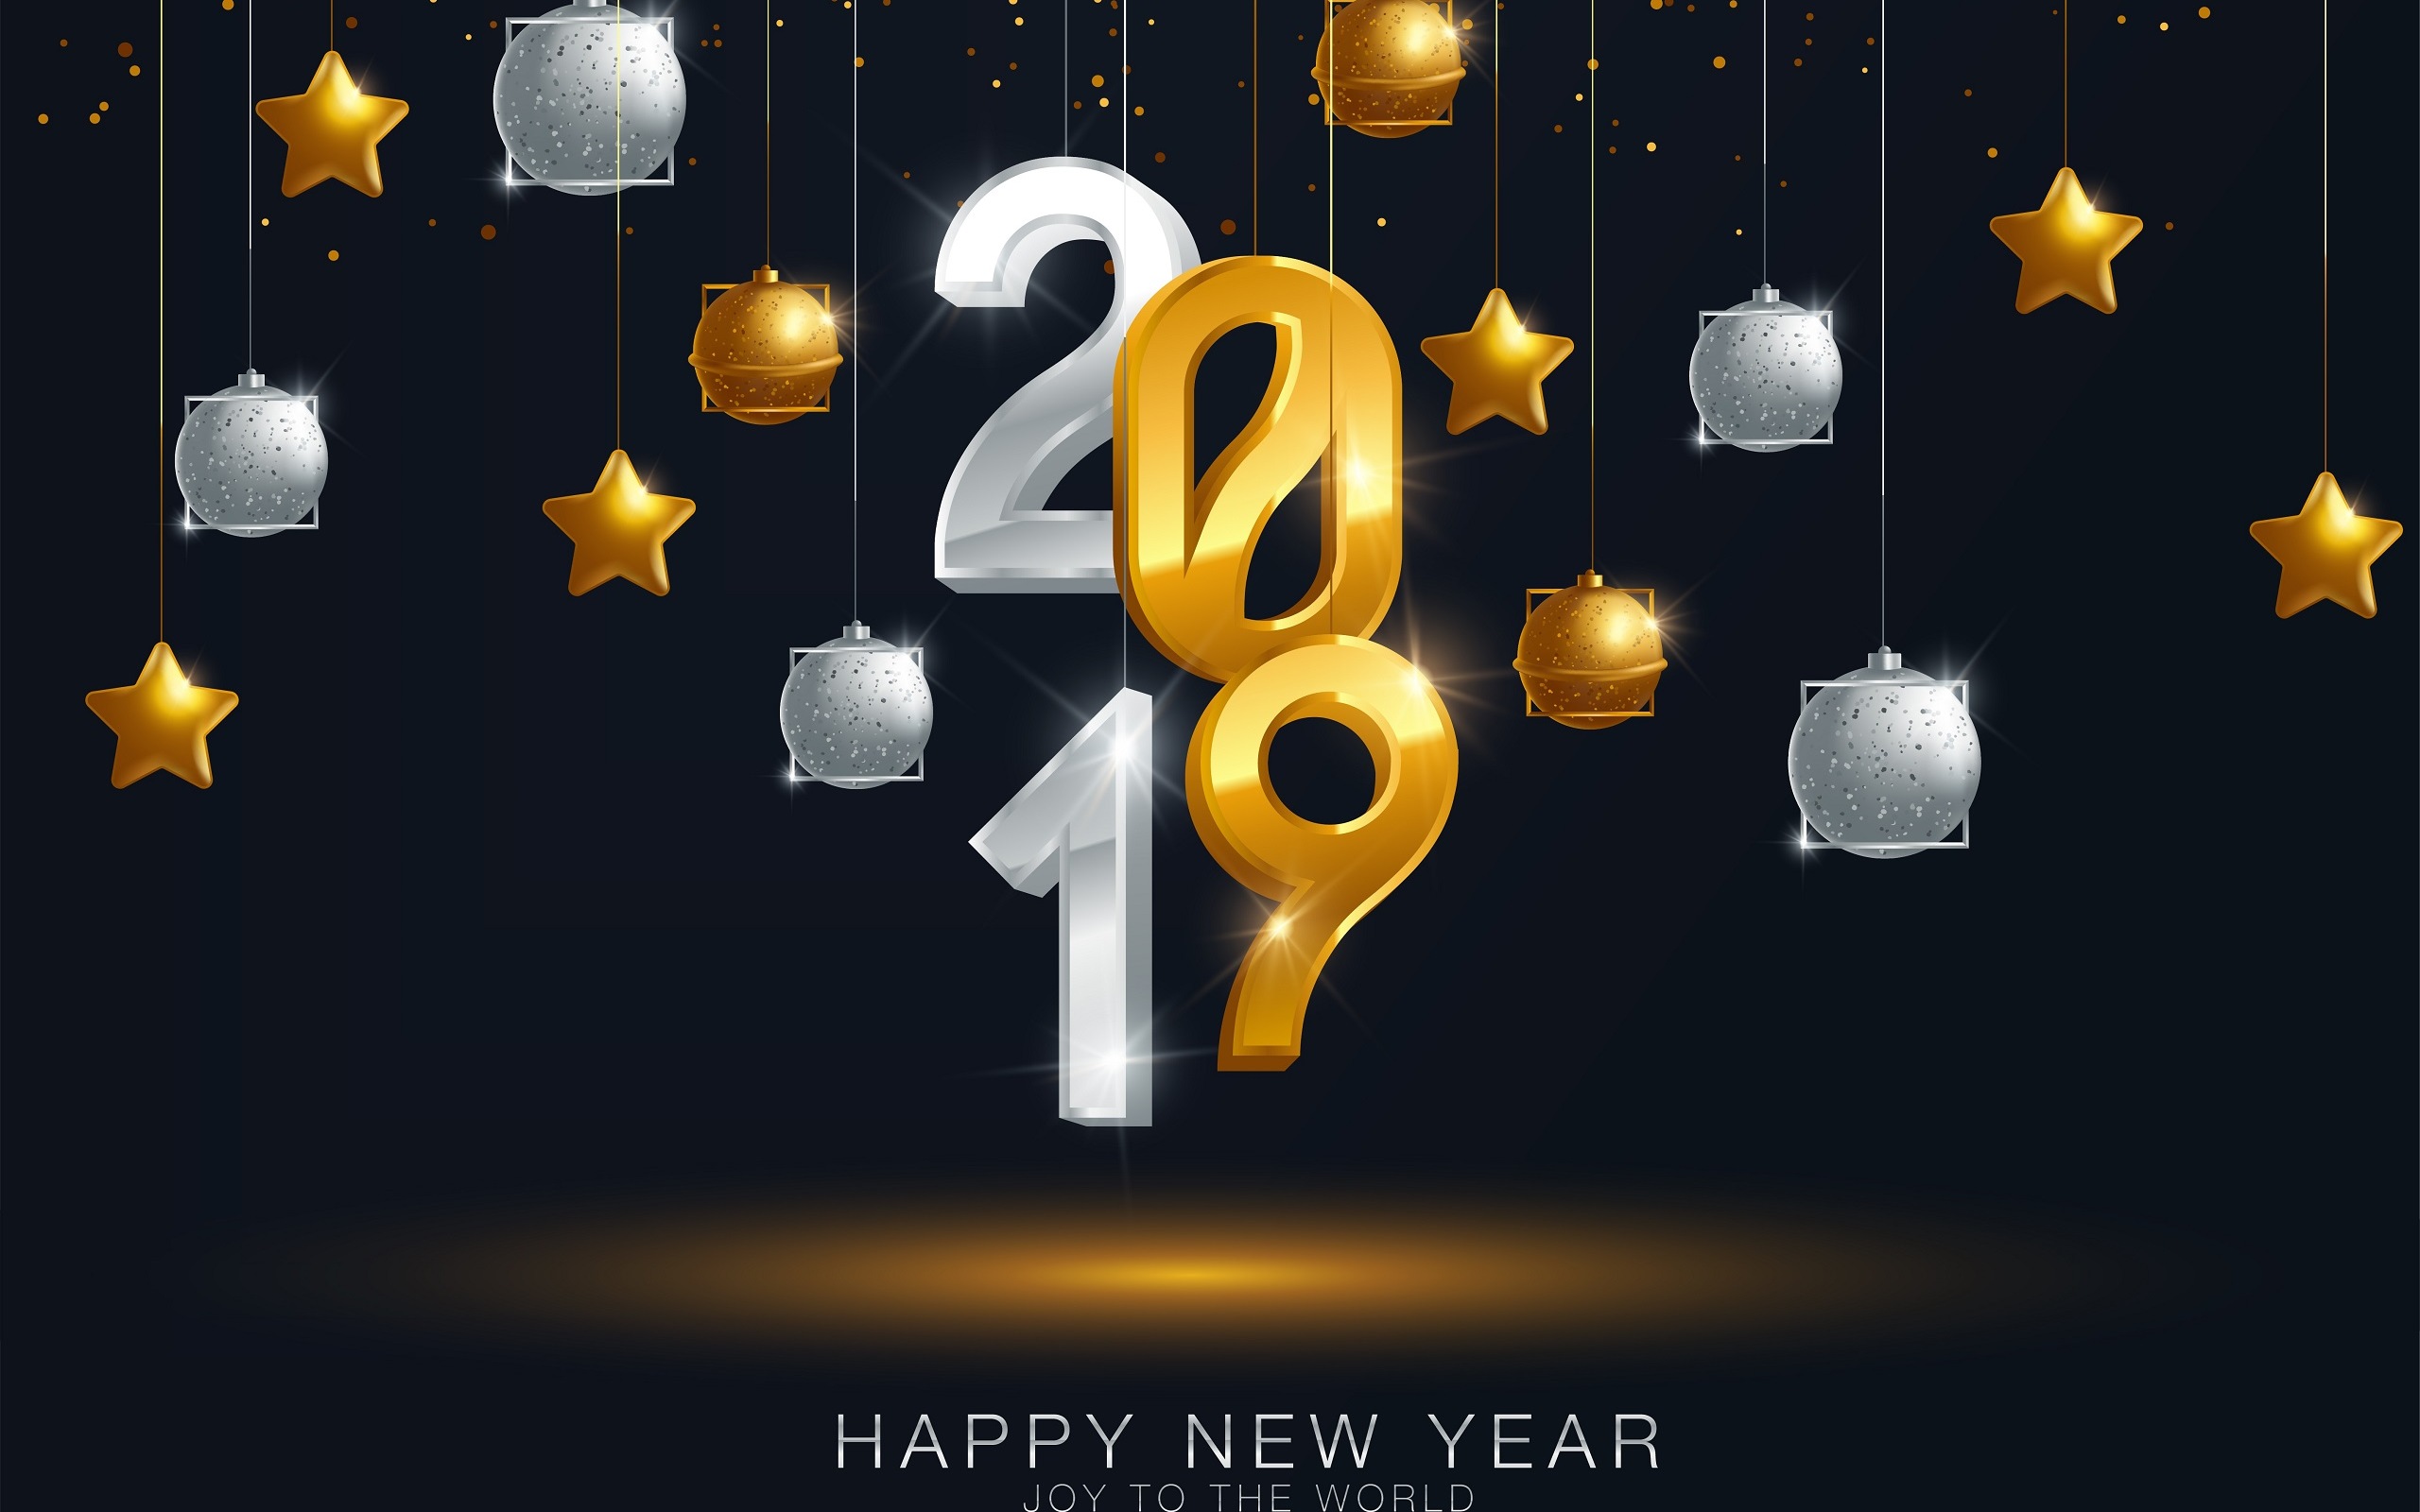 Happy New Year 2019 HD wallpapers #12 - 2560x1600